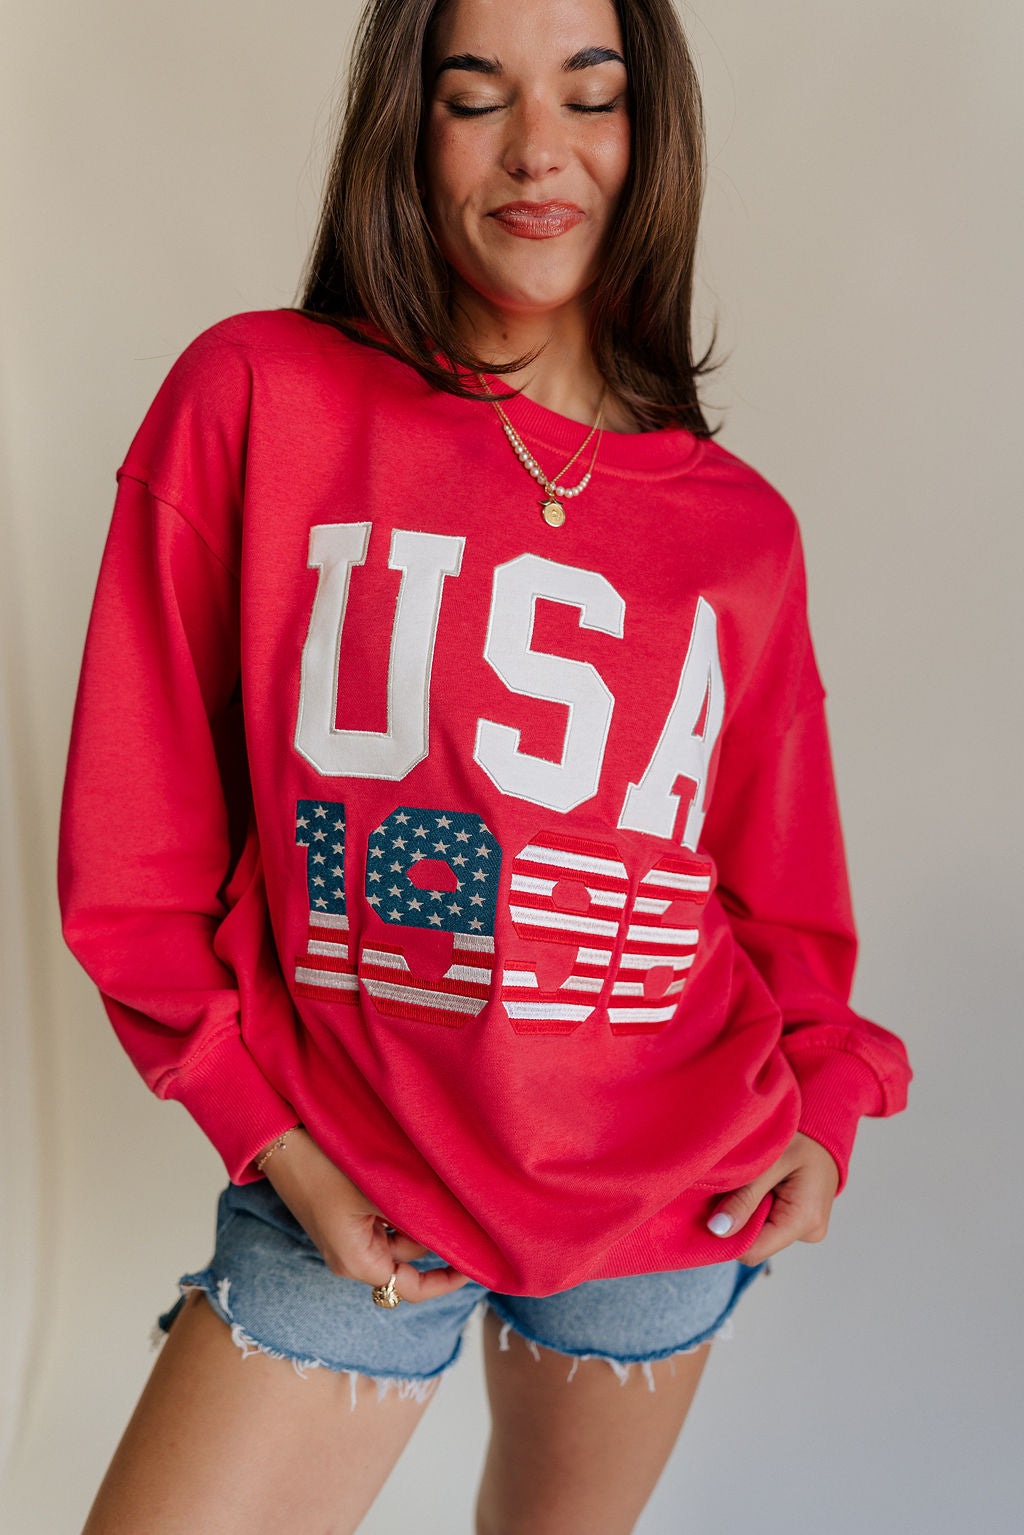 close up view of female model wearing the USA 1996 Red Long Sleeve Sweatshirt which features Lightweight Red Fabric, Round Neckline, Long Sleeves, Ribbed Hem and USA 1996 graphic with white, red and blue stitch design